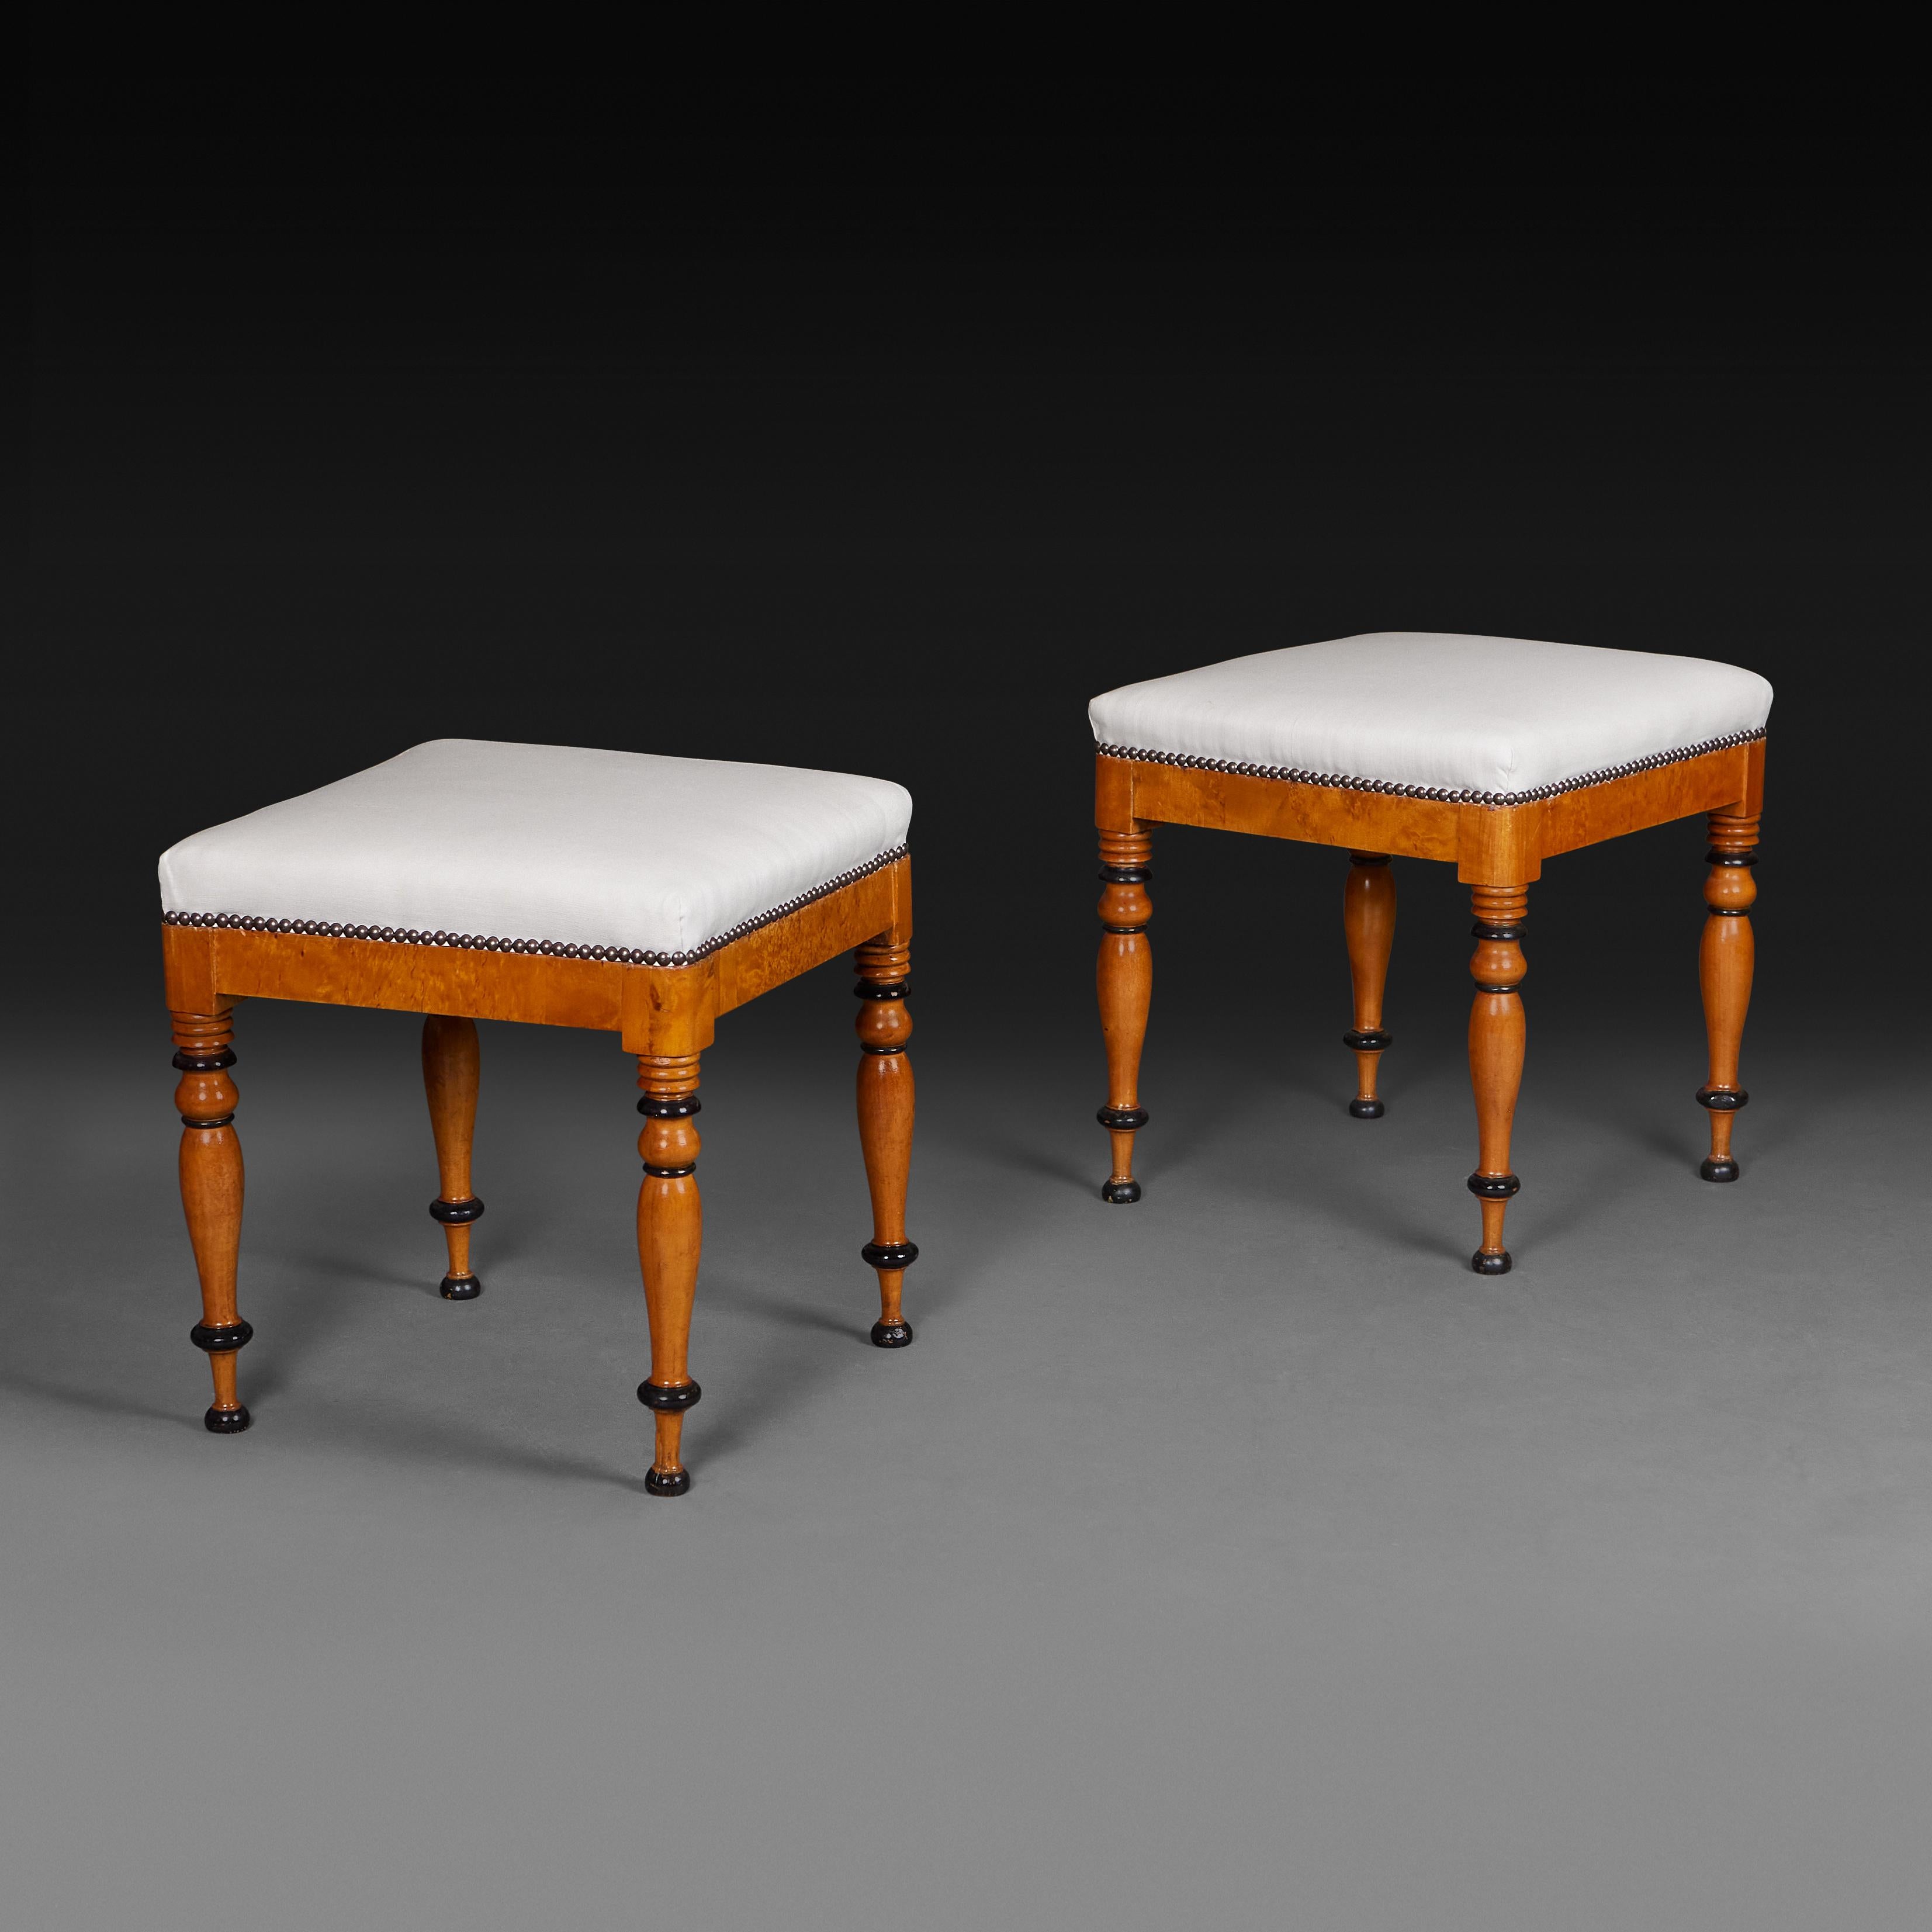 Austria, circa 1880

A pair of Biedermeier stools with Maplewood bases, the legs turned with ebonised bands, now with seats upholstered in white linen.

Height        45.00cm
Width          42.00cm
Depth          42.00cm